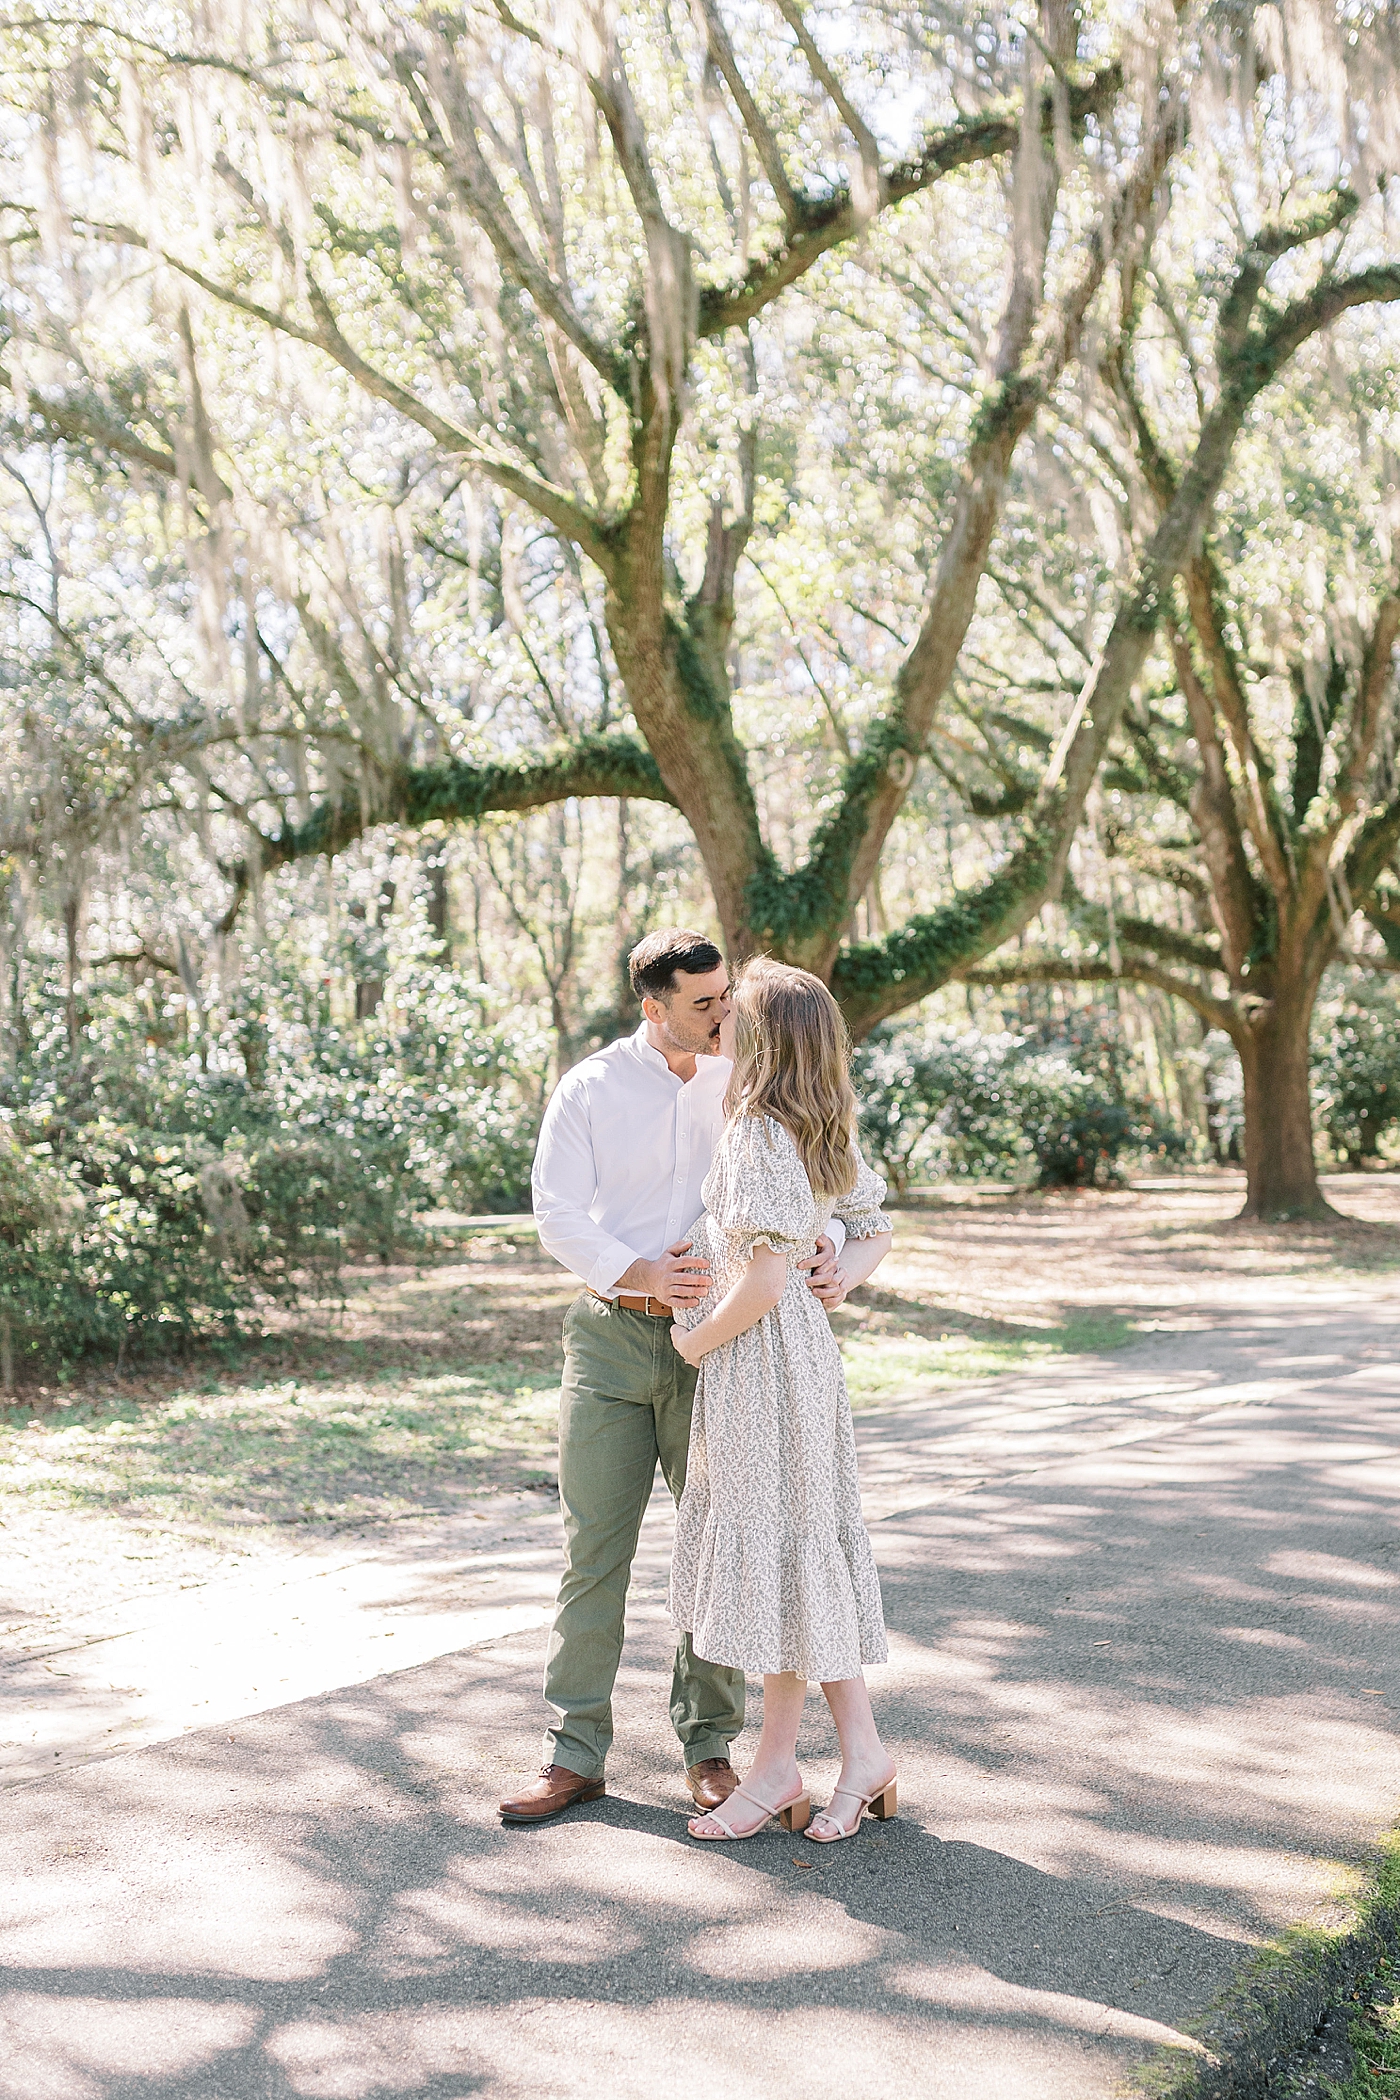 Husband and wife kissing and holding her pregnant belly on an oak tree-lined walkway Maternity Session at Charlestowne Landing| Image by Caitlyn Motycka Photography